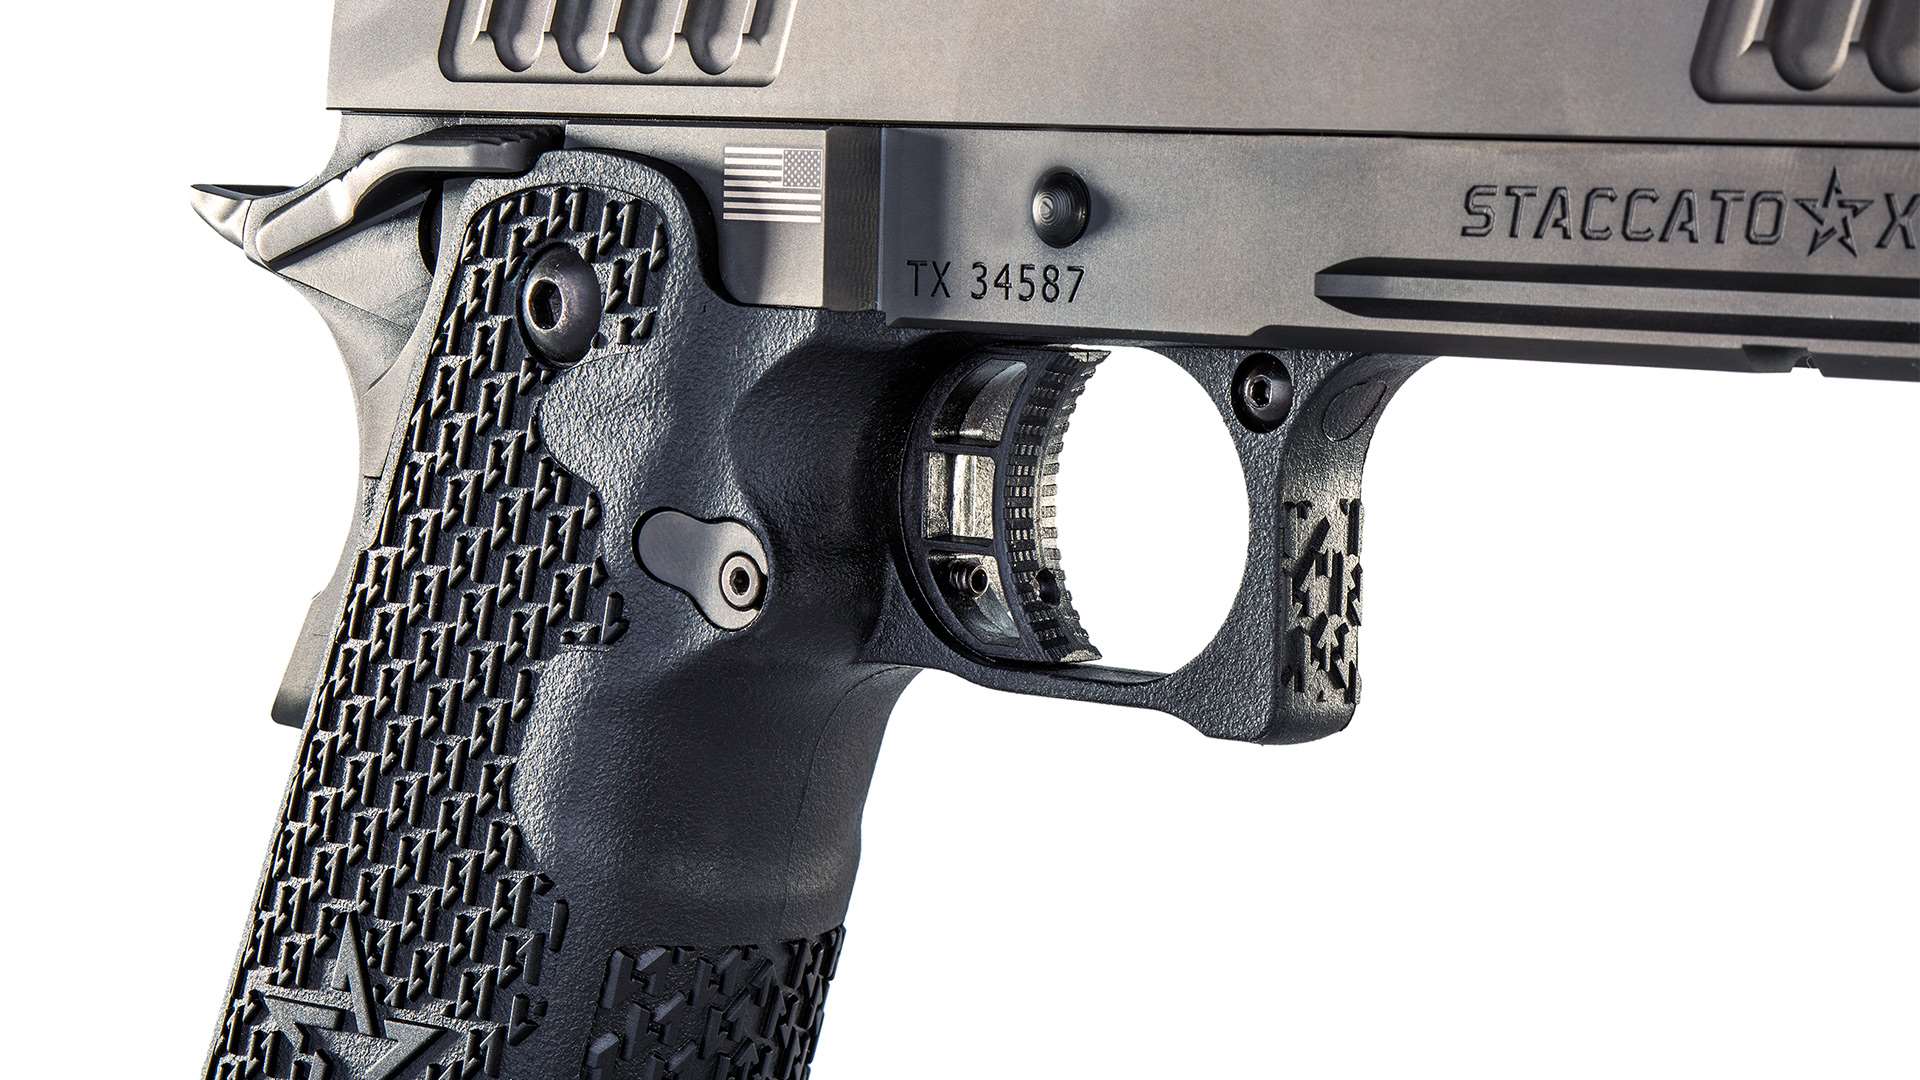 Staccato XL 9mm pistol